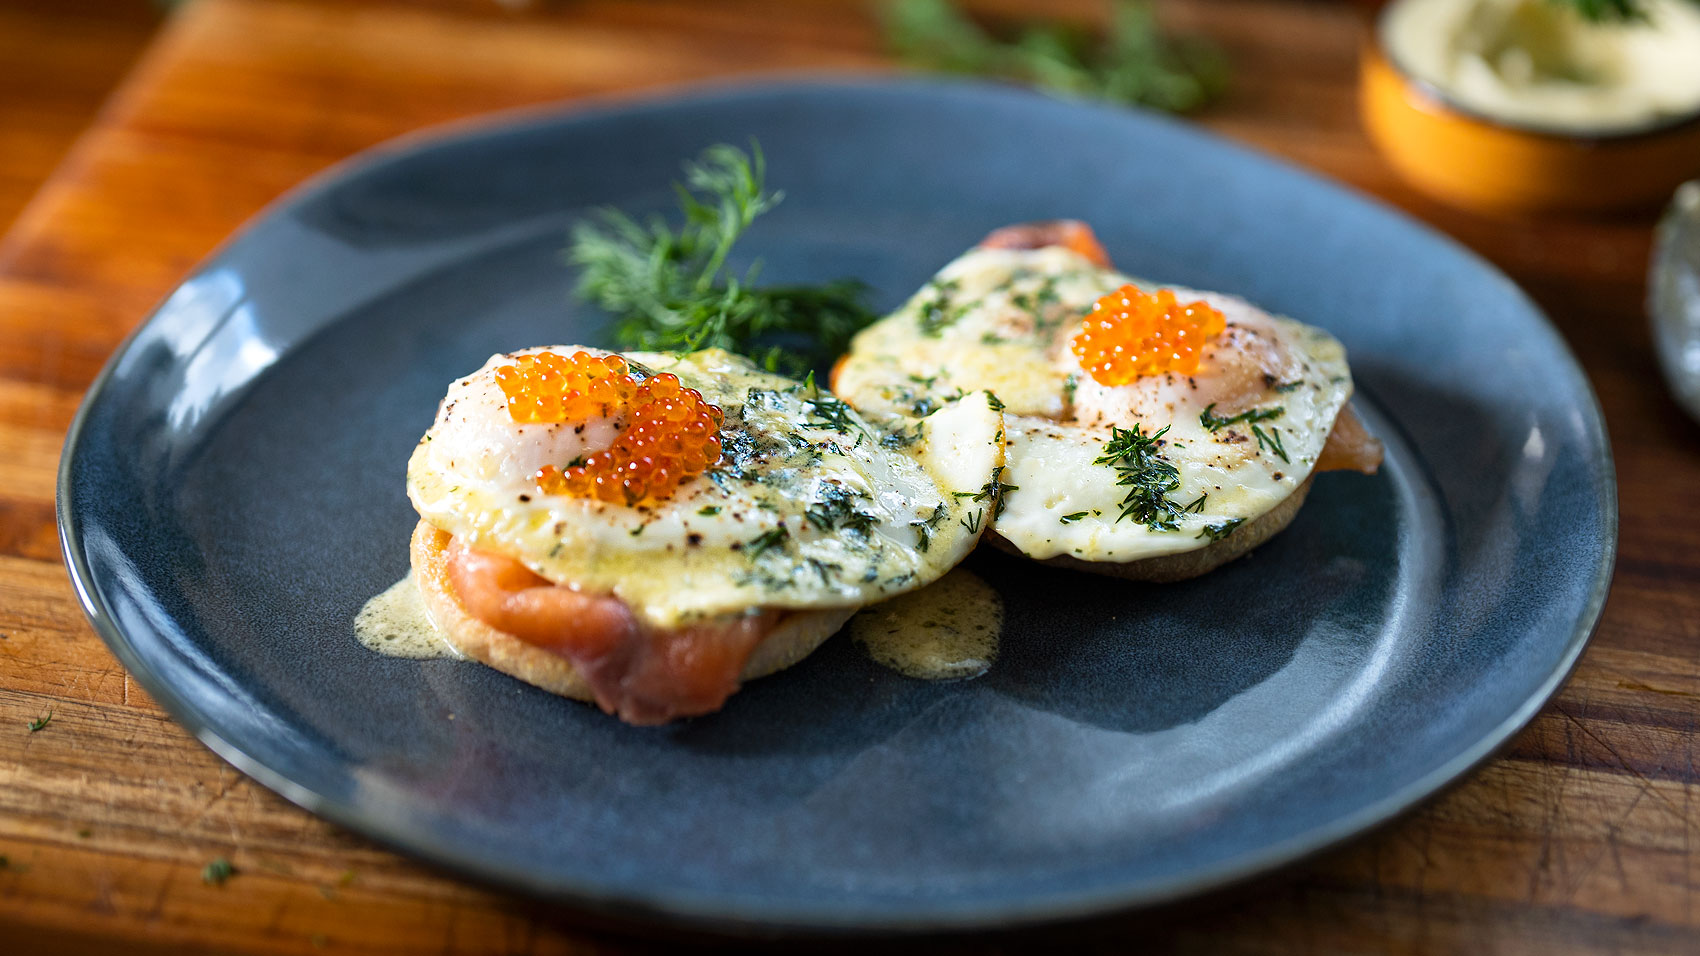 Fried Eggs and Salmon Muffins - Easy Meals with Video Recipes by Chef Joel  Mielle - RECIPE30